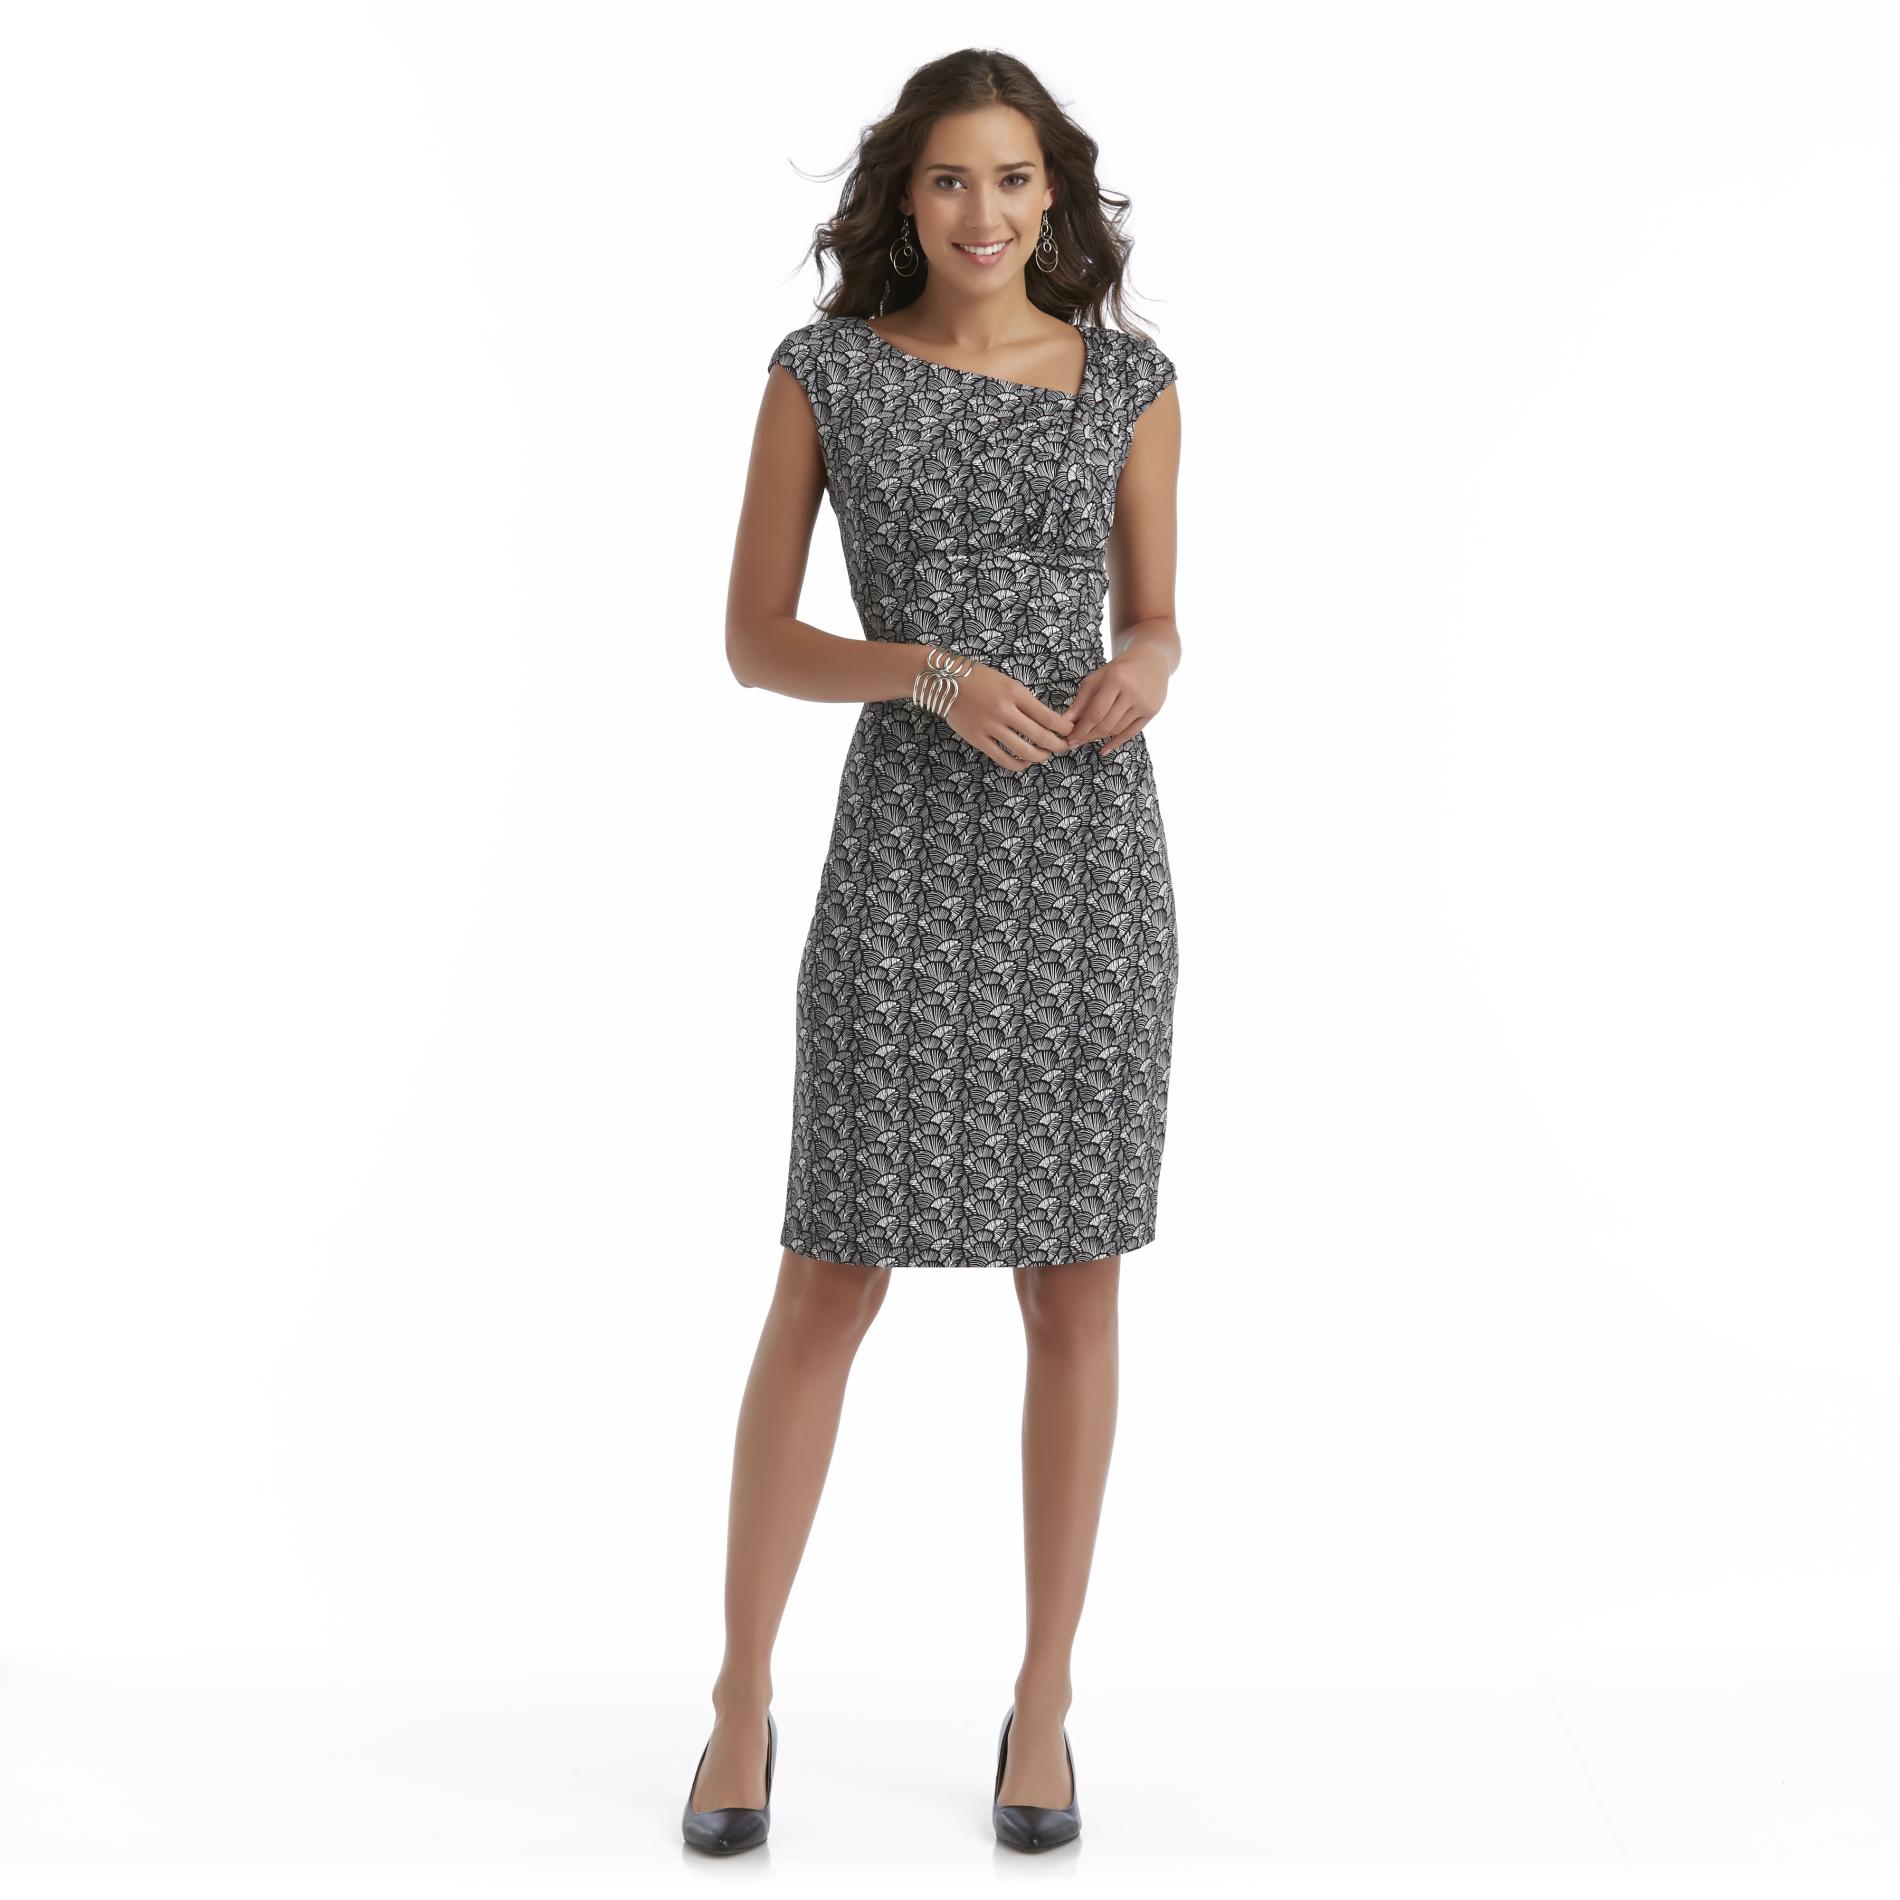 Women's Dresses on Clearance